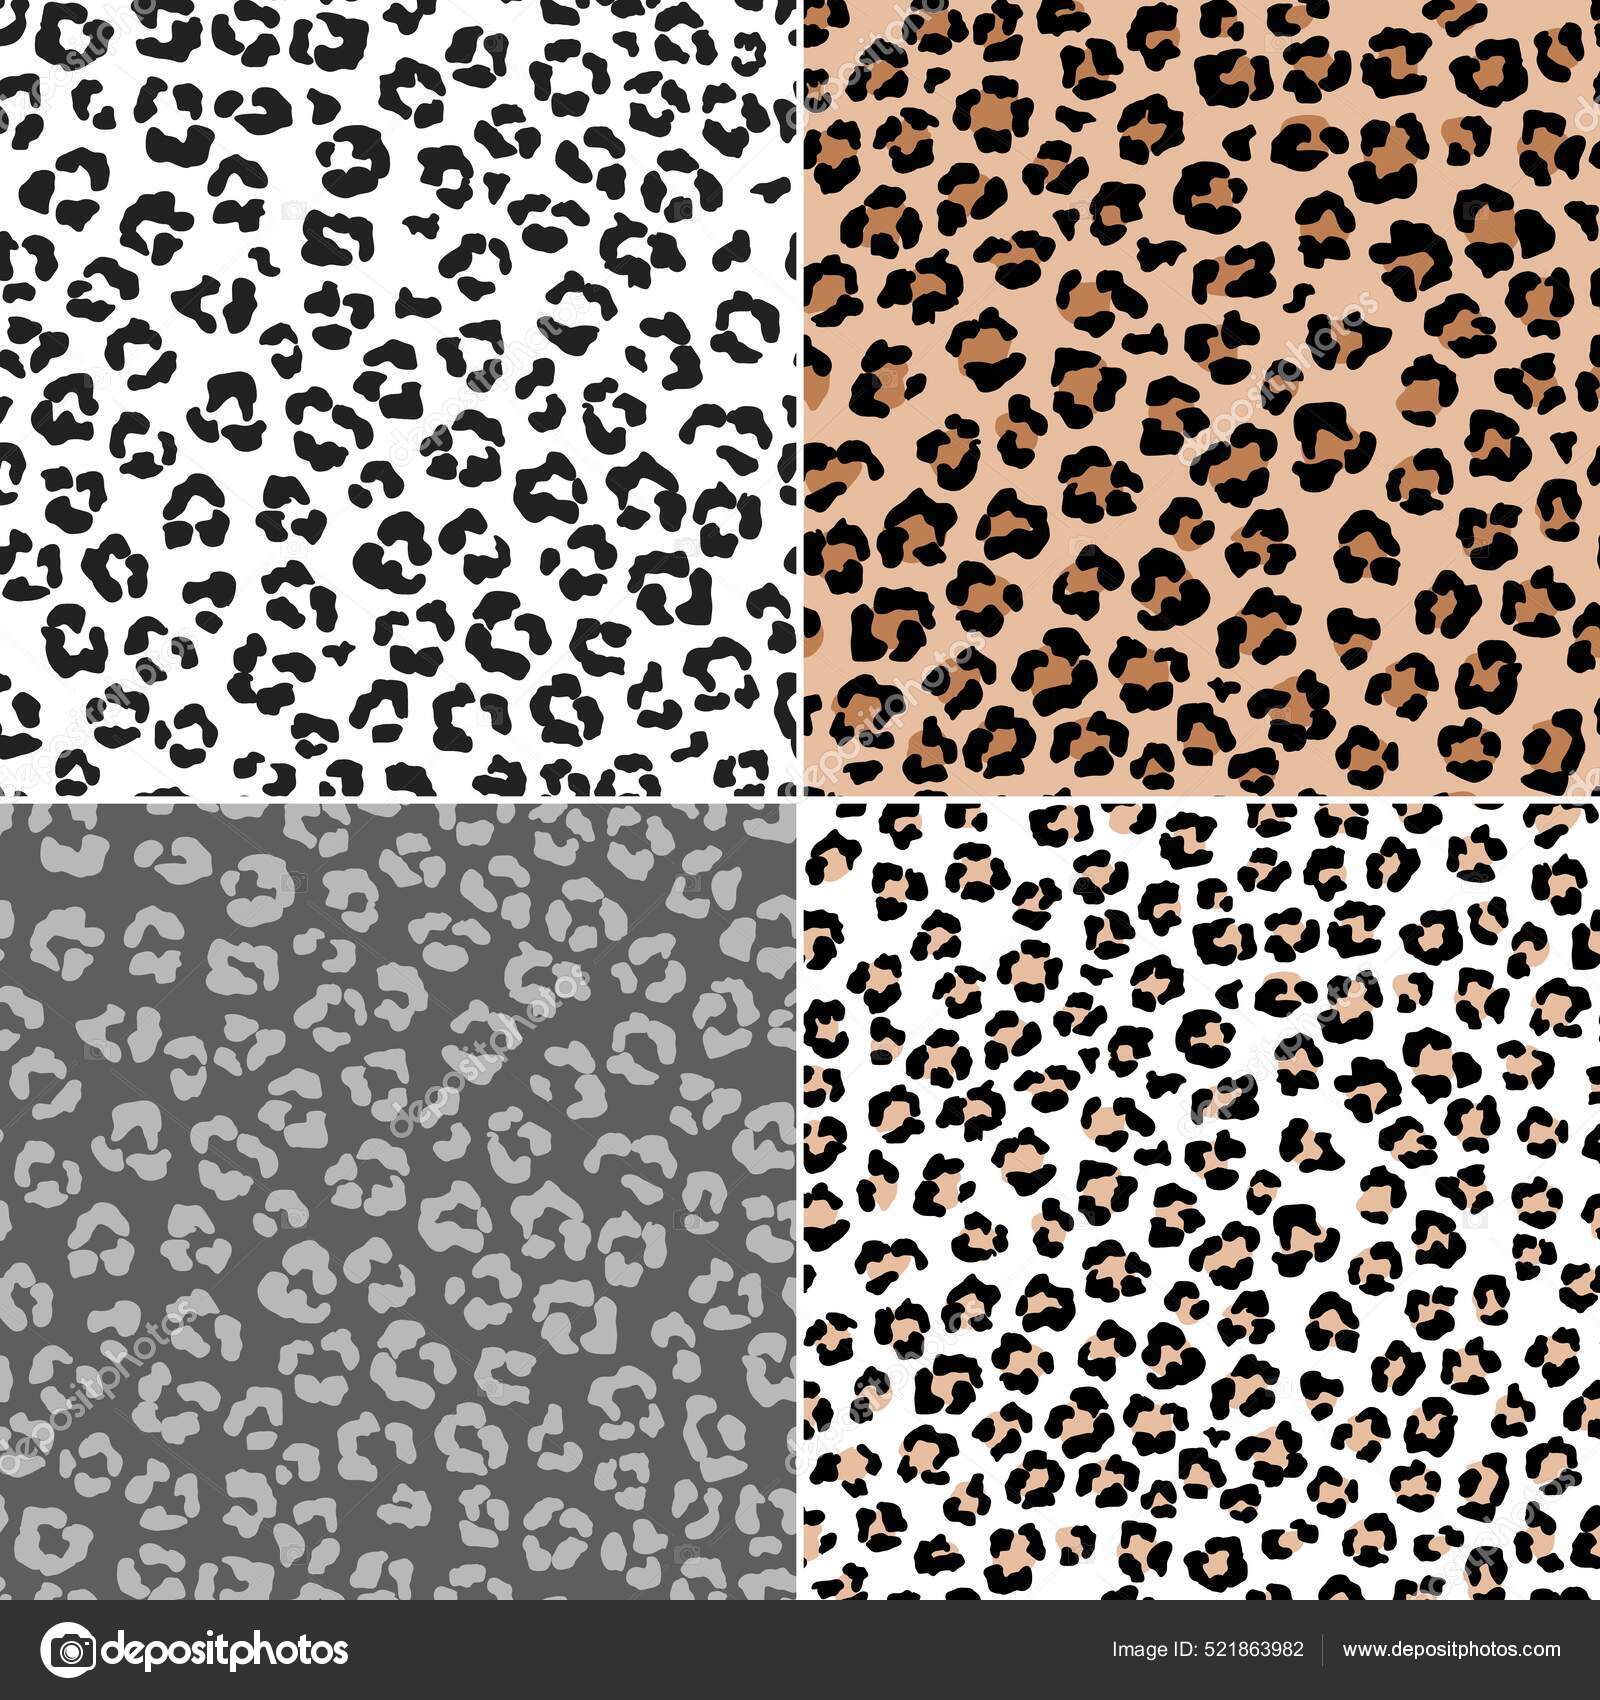 Seamless black and white color leopard print Vector Image